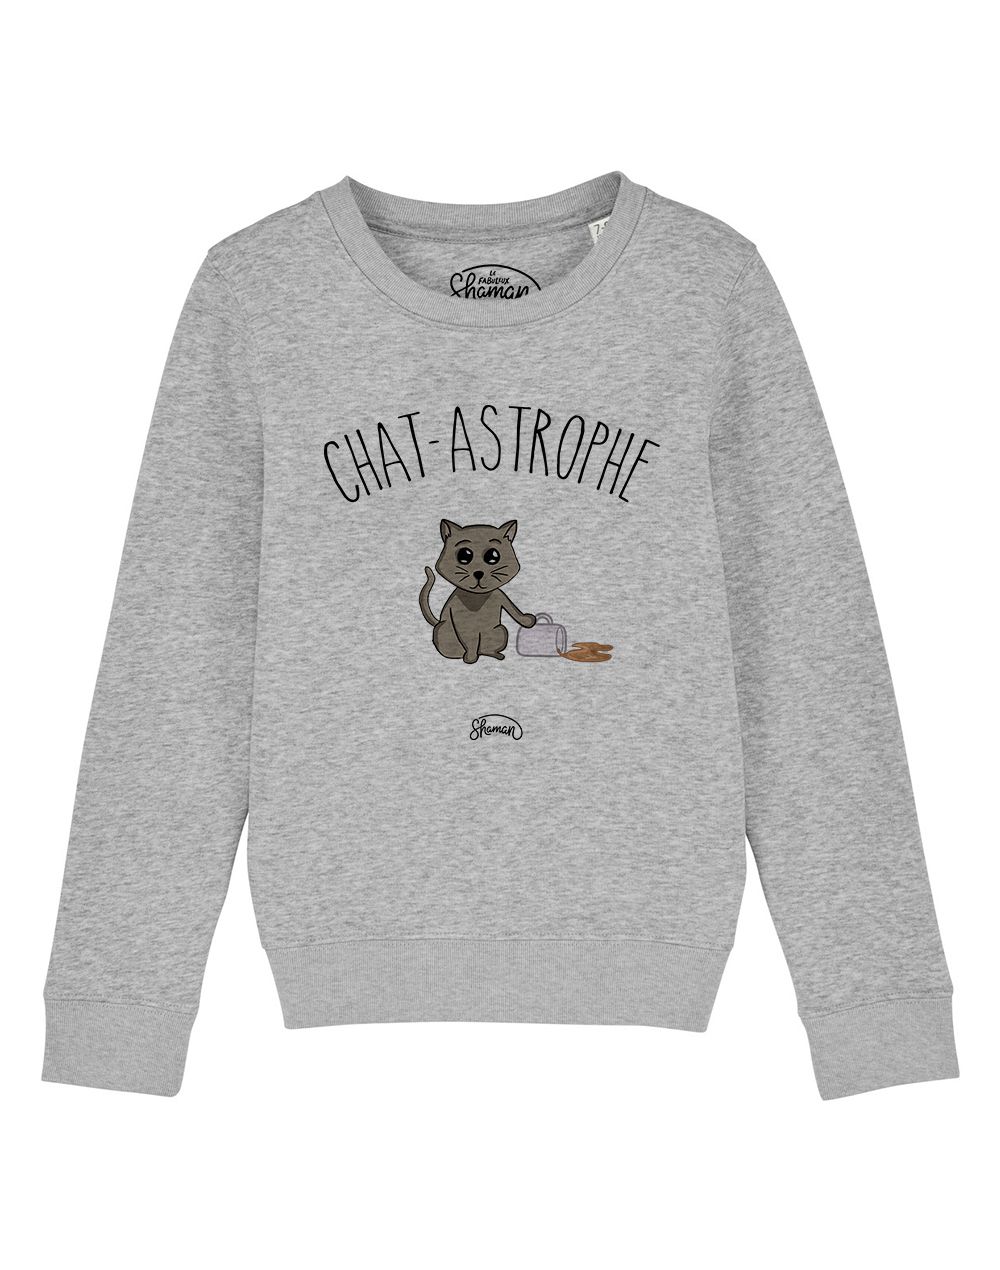 Sweat "Chat-astrophe"